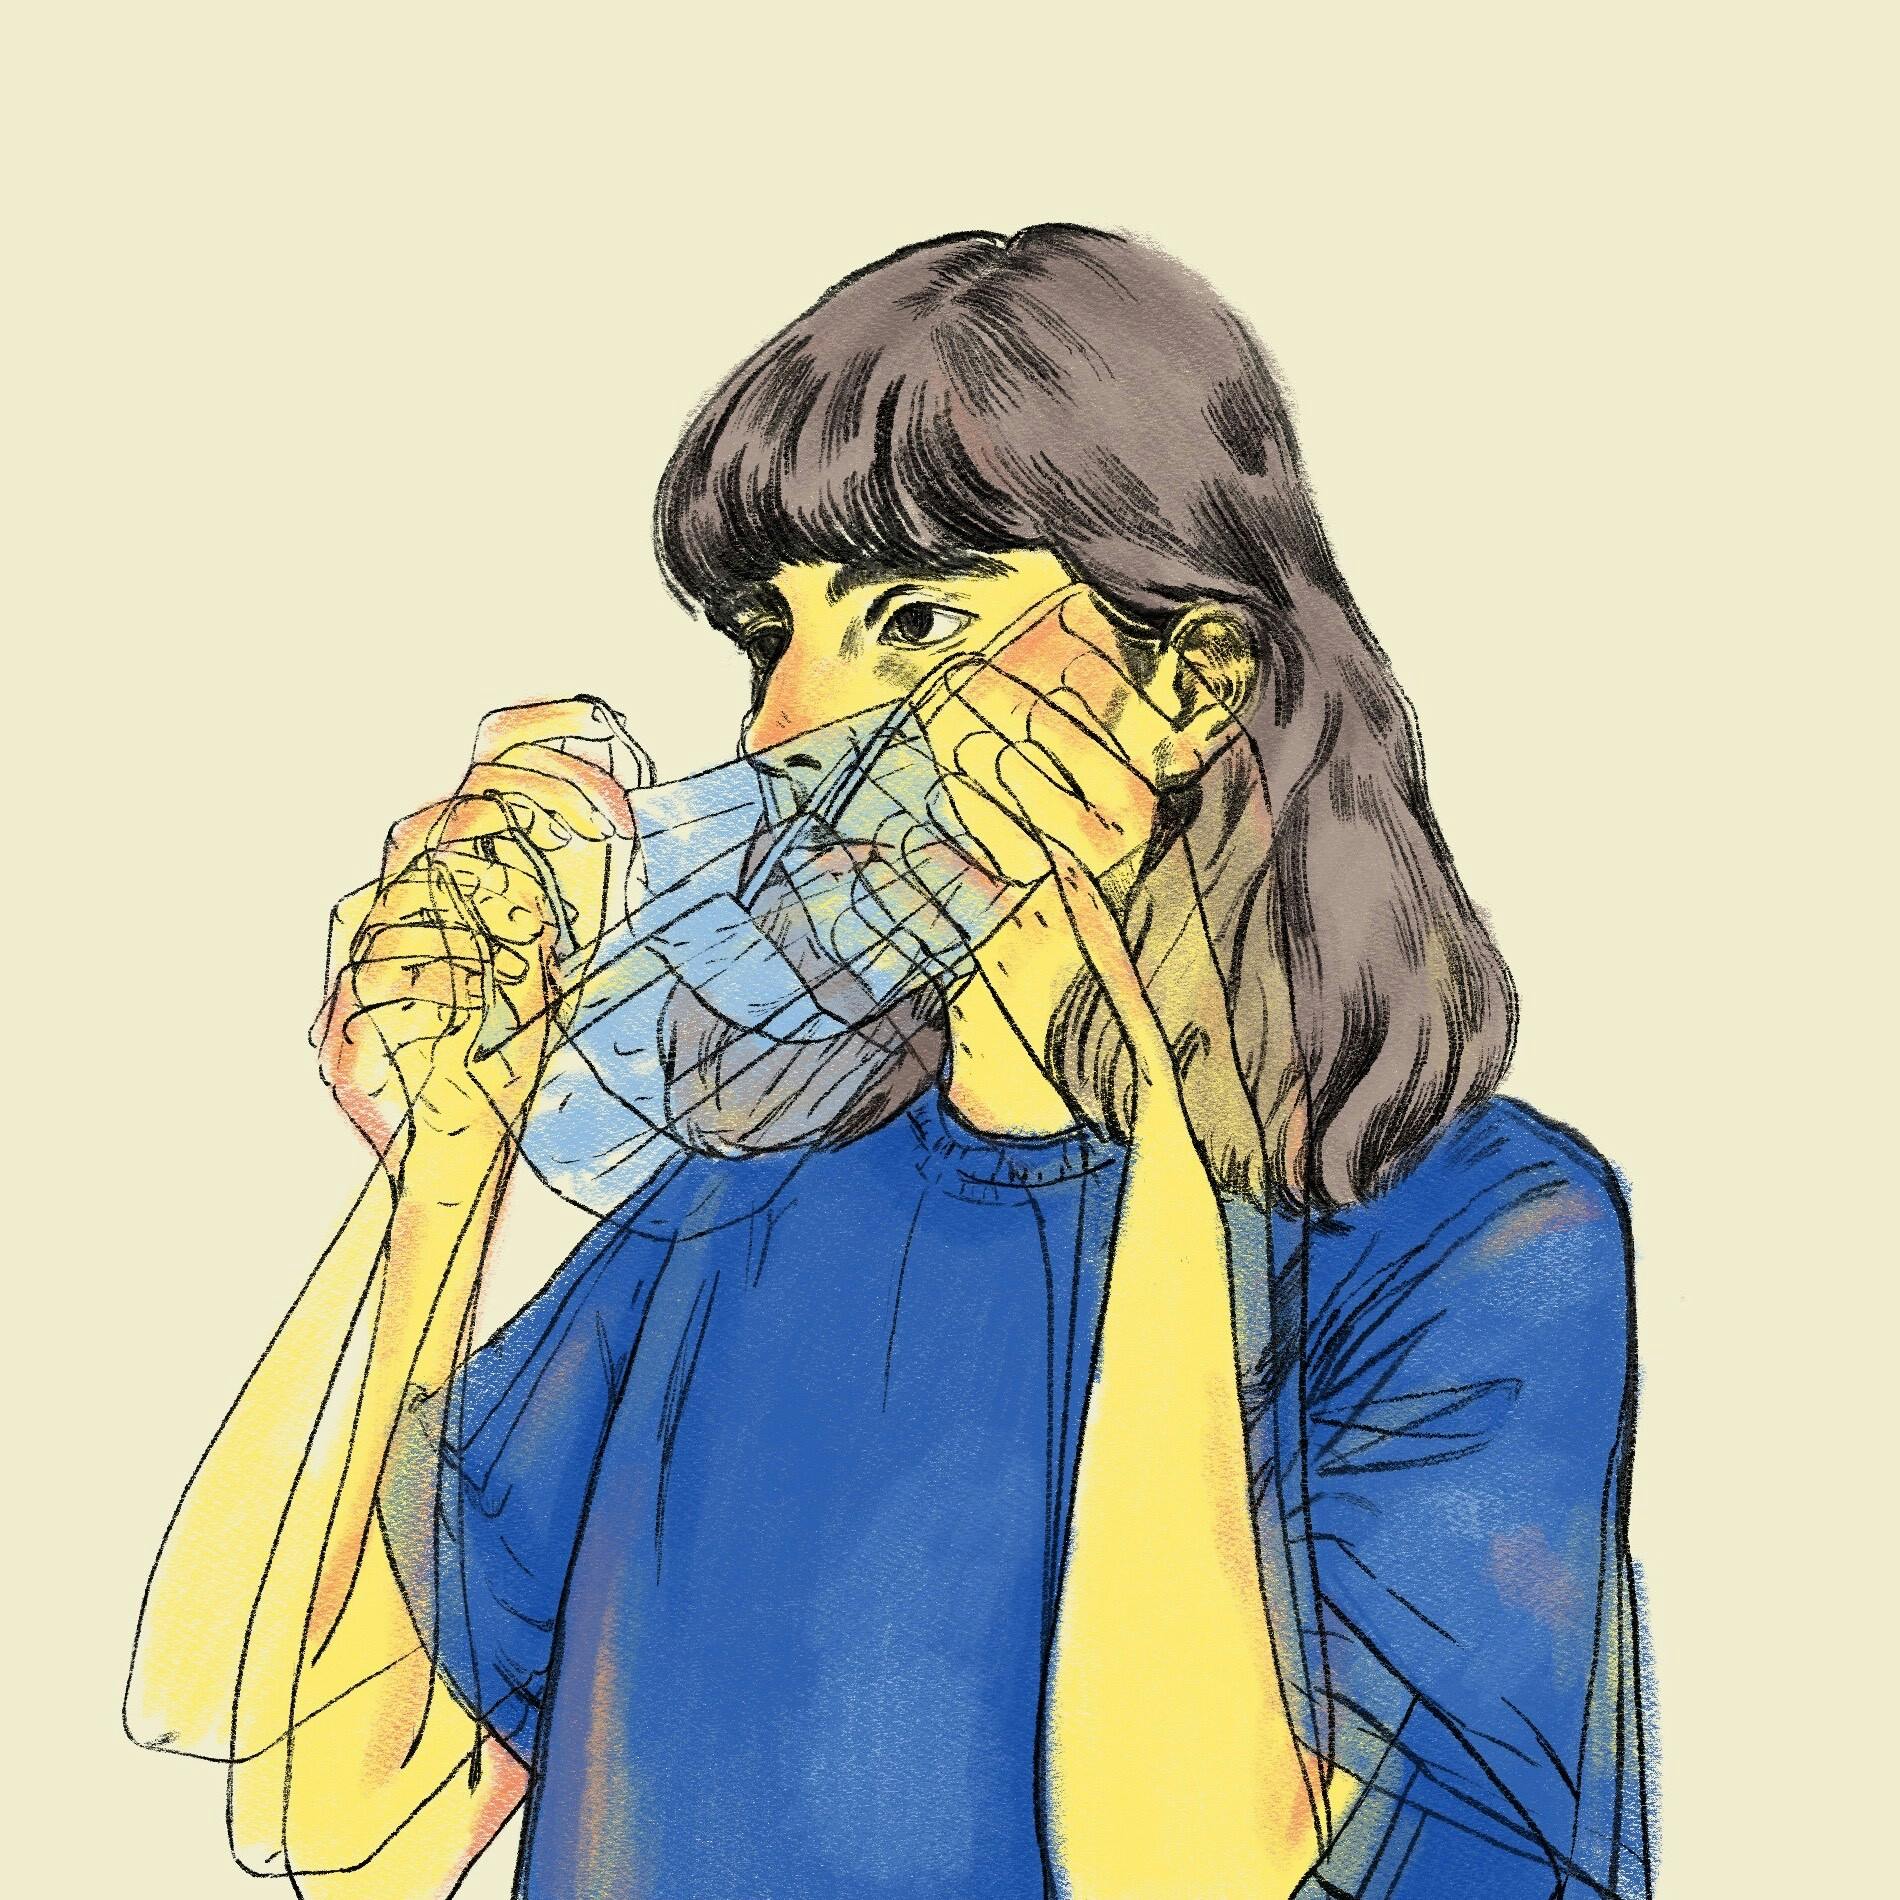 Illustration of Maedeh Mosaverzadeh. Rough pencil drawing coloured in simple flats, many frames leading up to putting a medical mask on their face. 